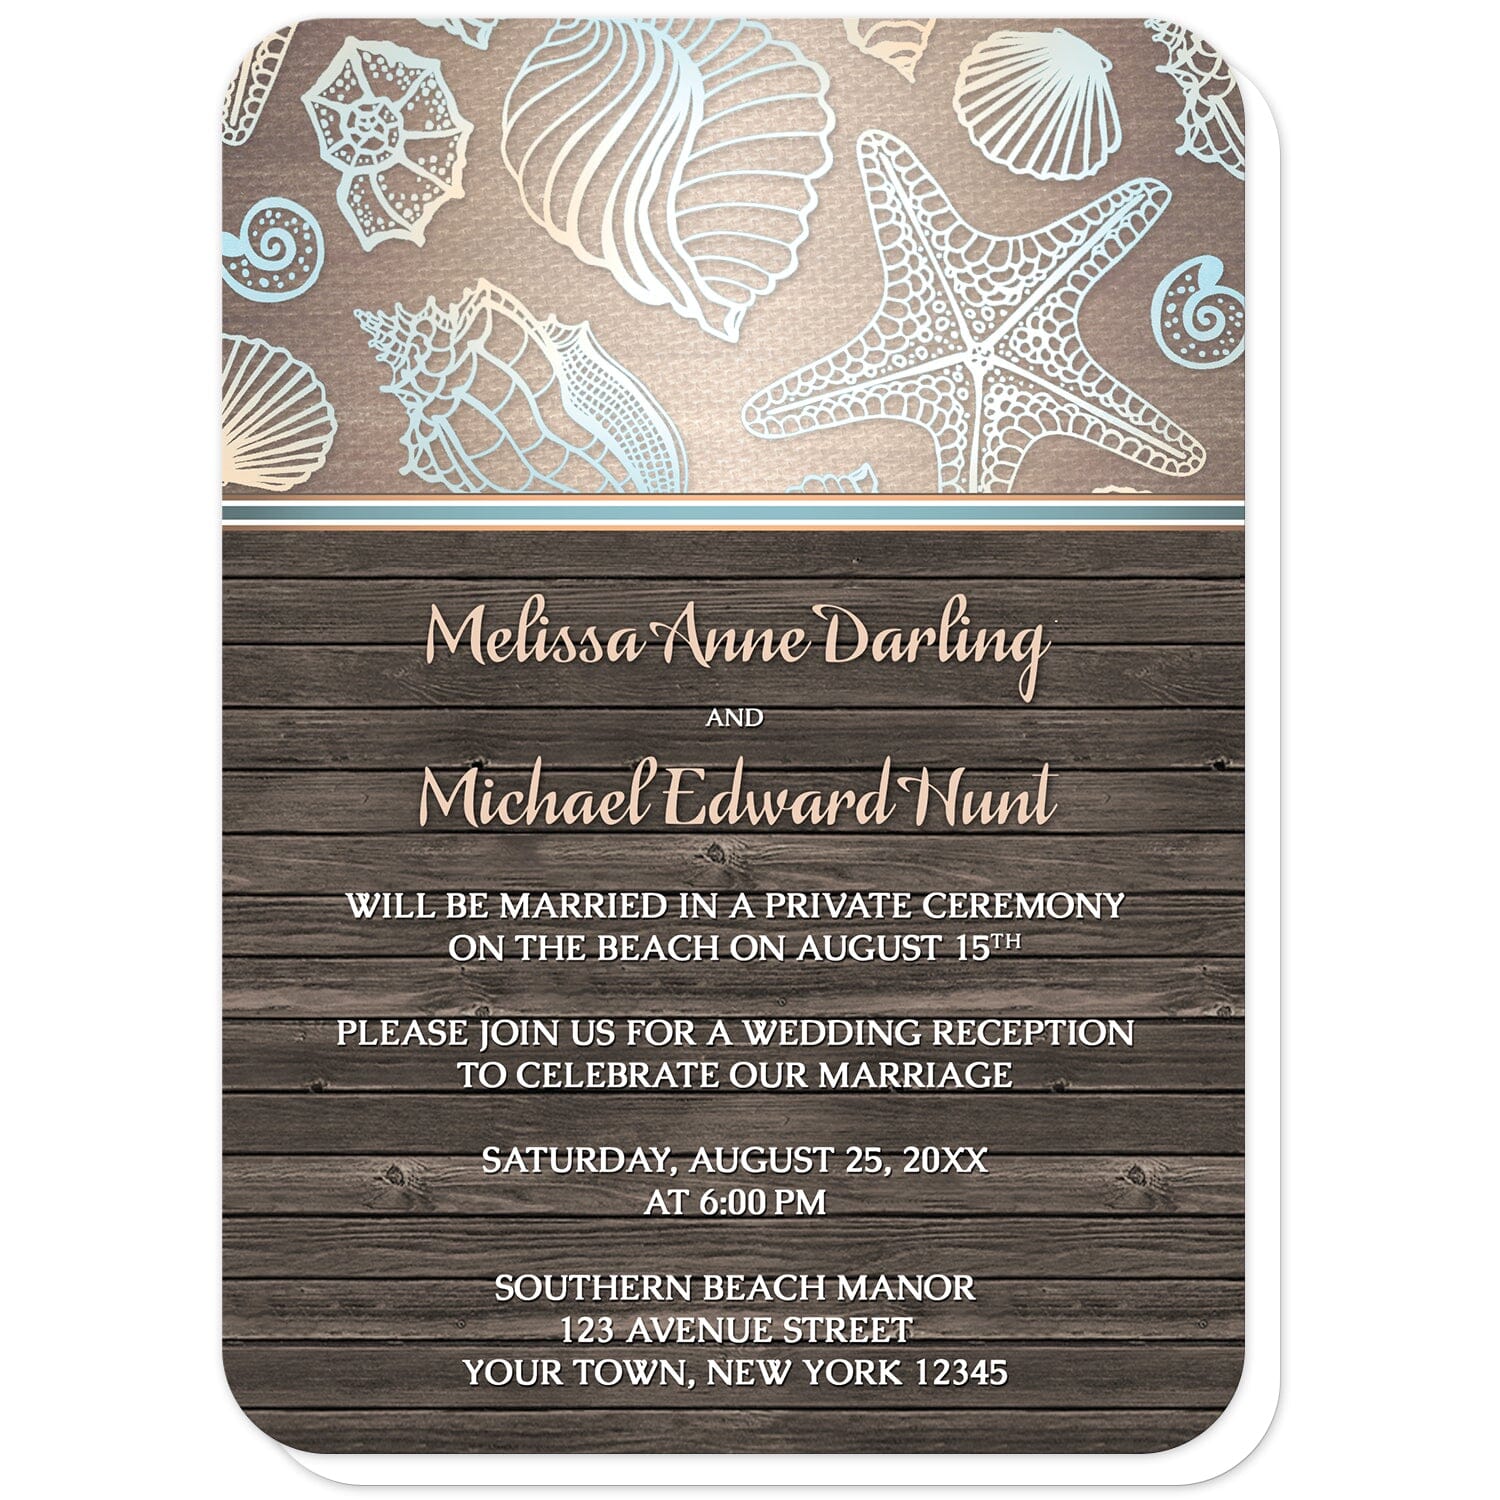 Rustic Wood Beach Seashell Reception Only Invitations (with rounded corners) at Artistically Invited. Rustic wood beach seashell reception only invitations with a blue, orange, and white seashell outline pattern over a gradient sandy canvas texture illustration at the top. Your personalized post-wedding reception details are custom printed in white and light orange over a brown wood background below the seashells.